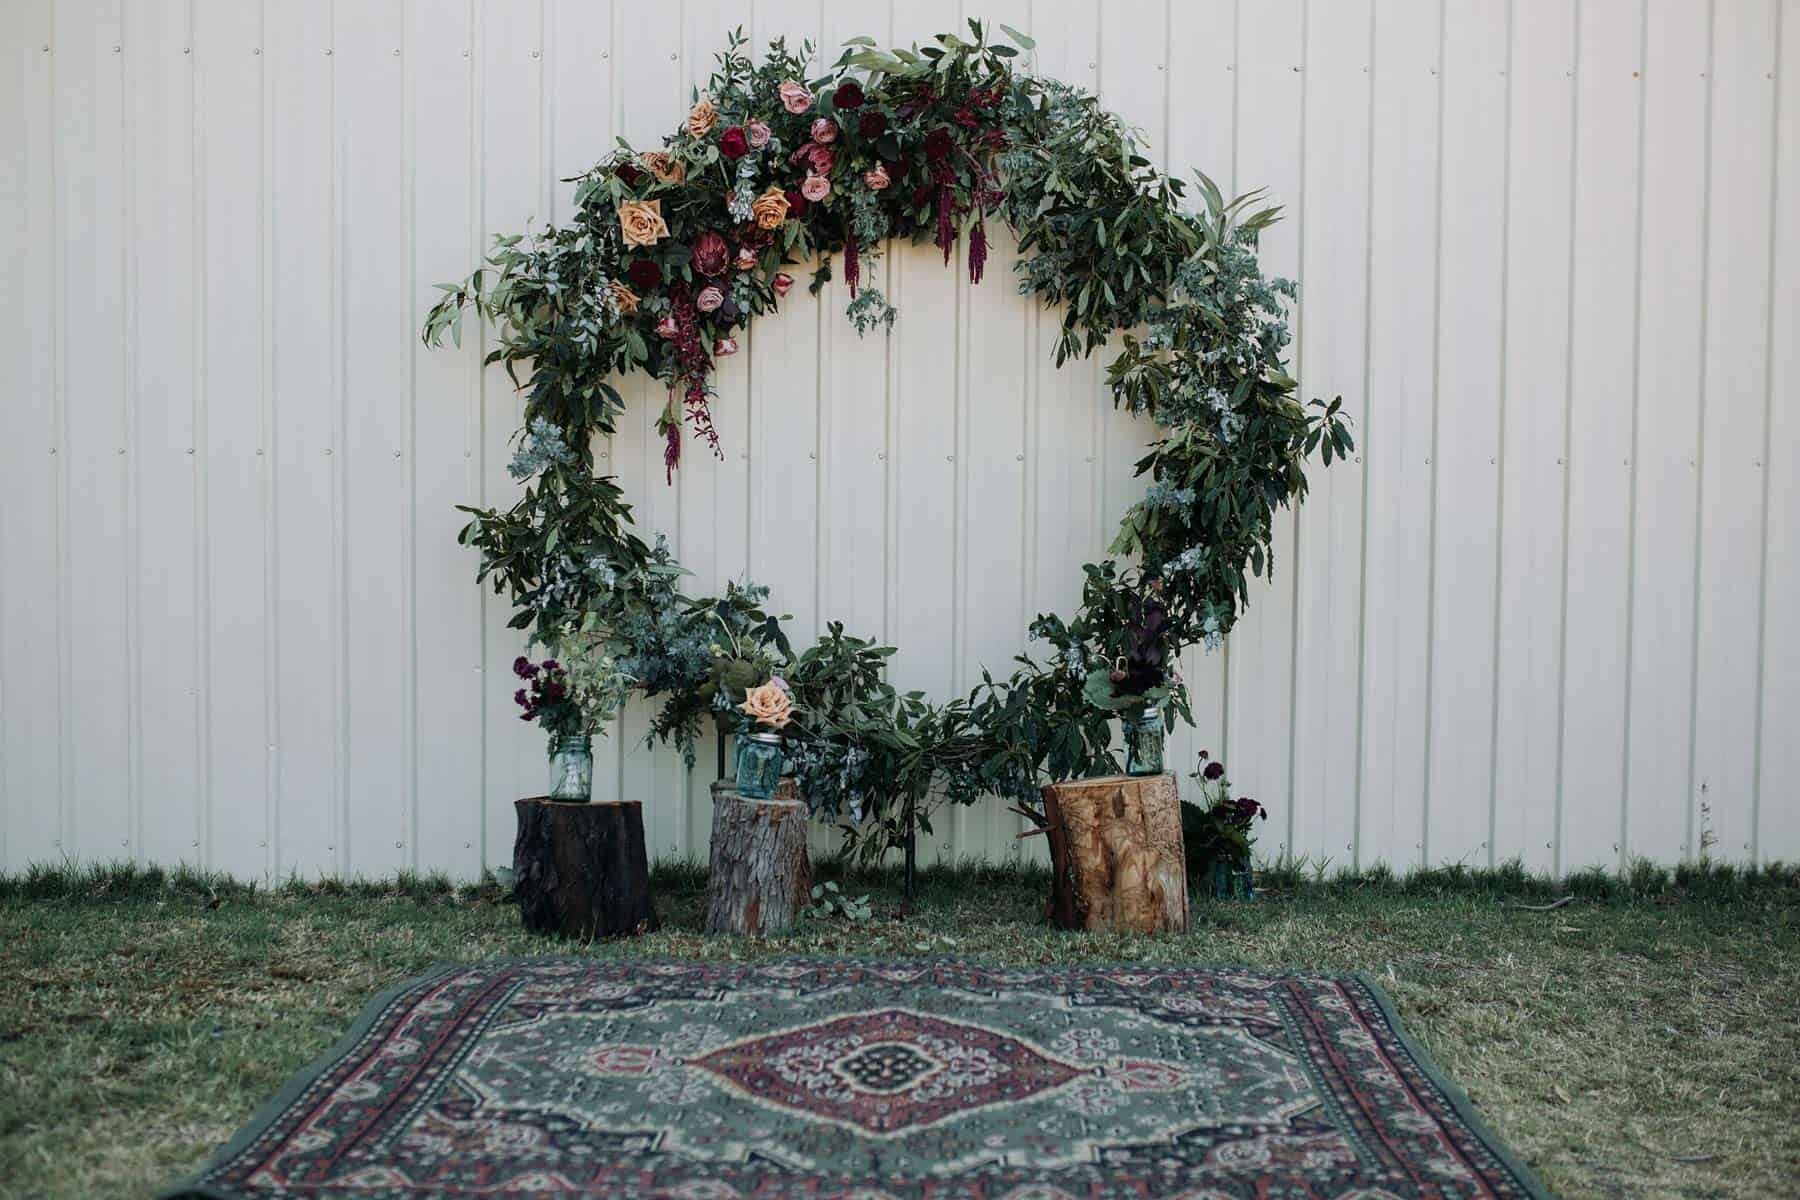 Circle floral arbour with lots of greenery